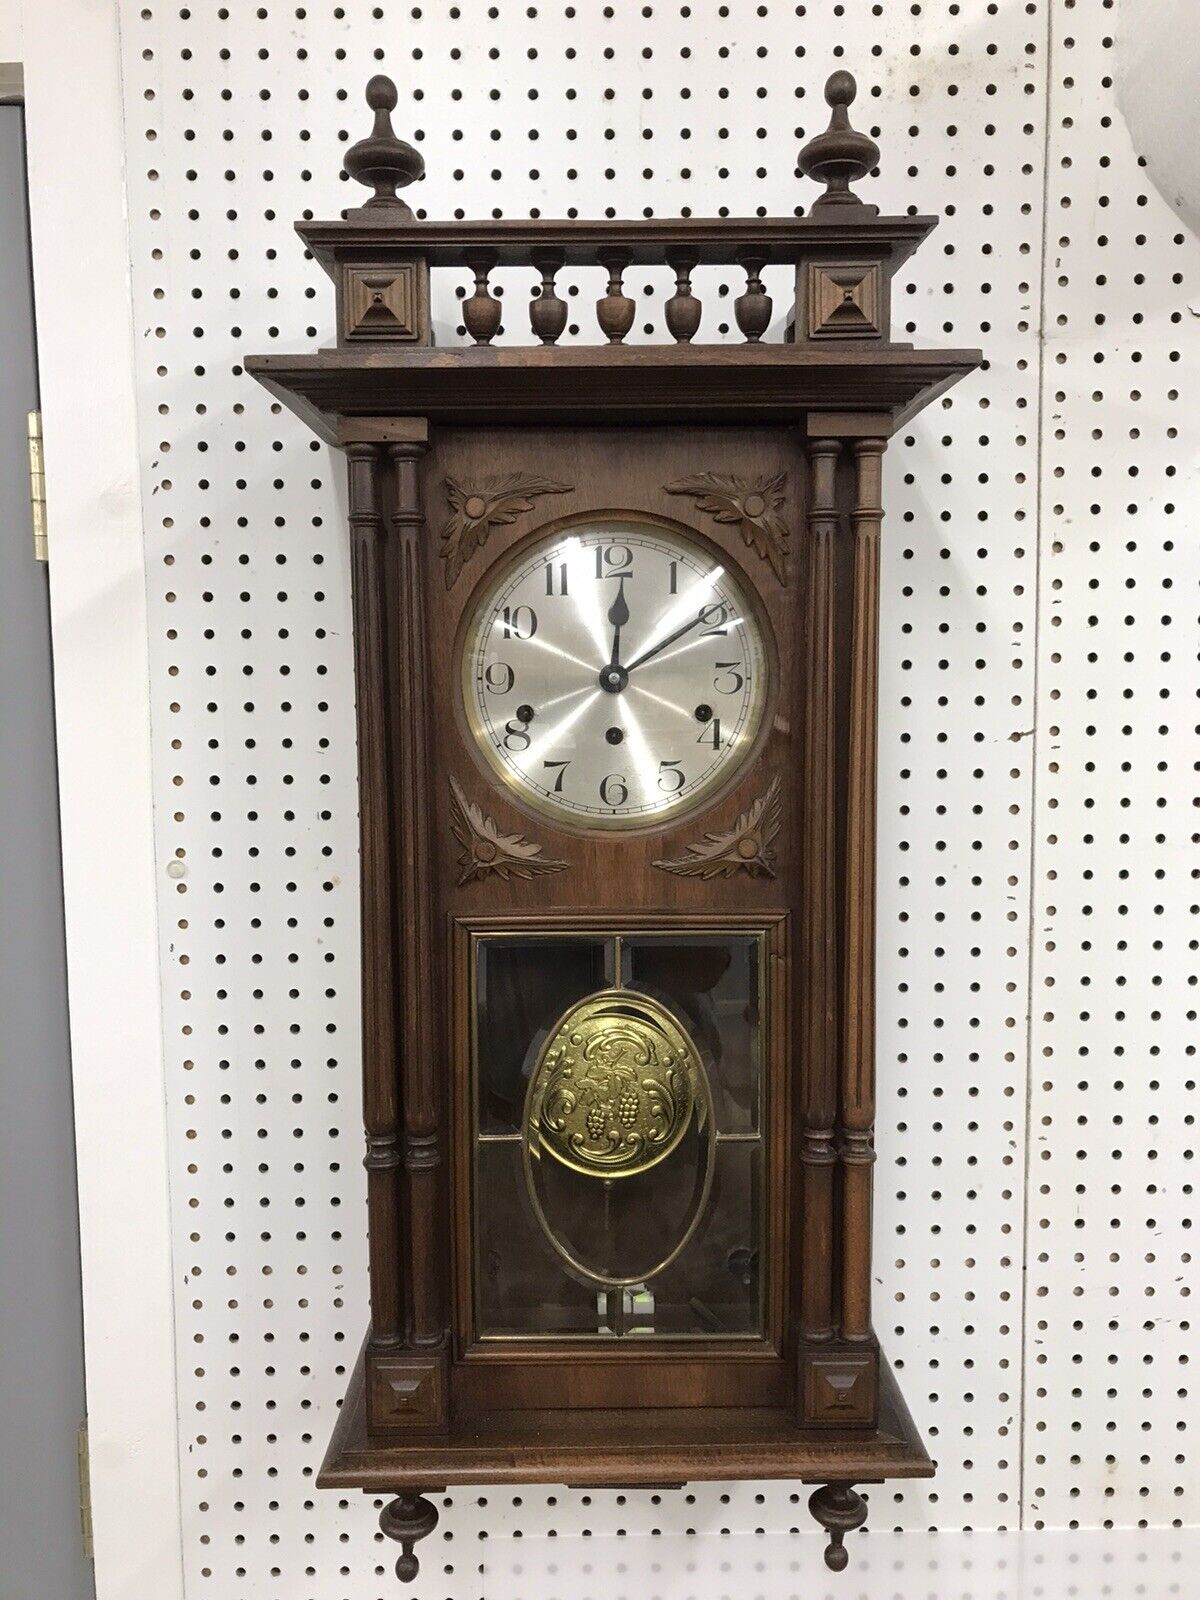 Antique Kienzle Wall Clock - Westminster Chime and Leaded Beveled Glass - Runs